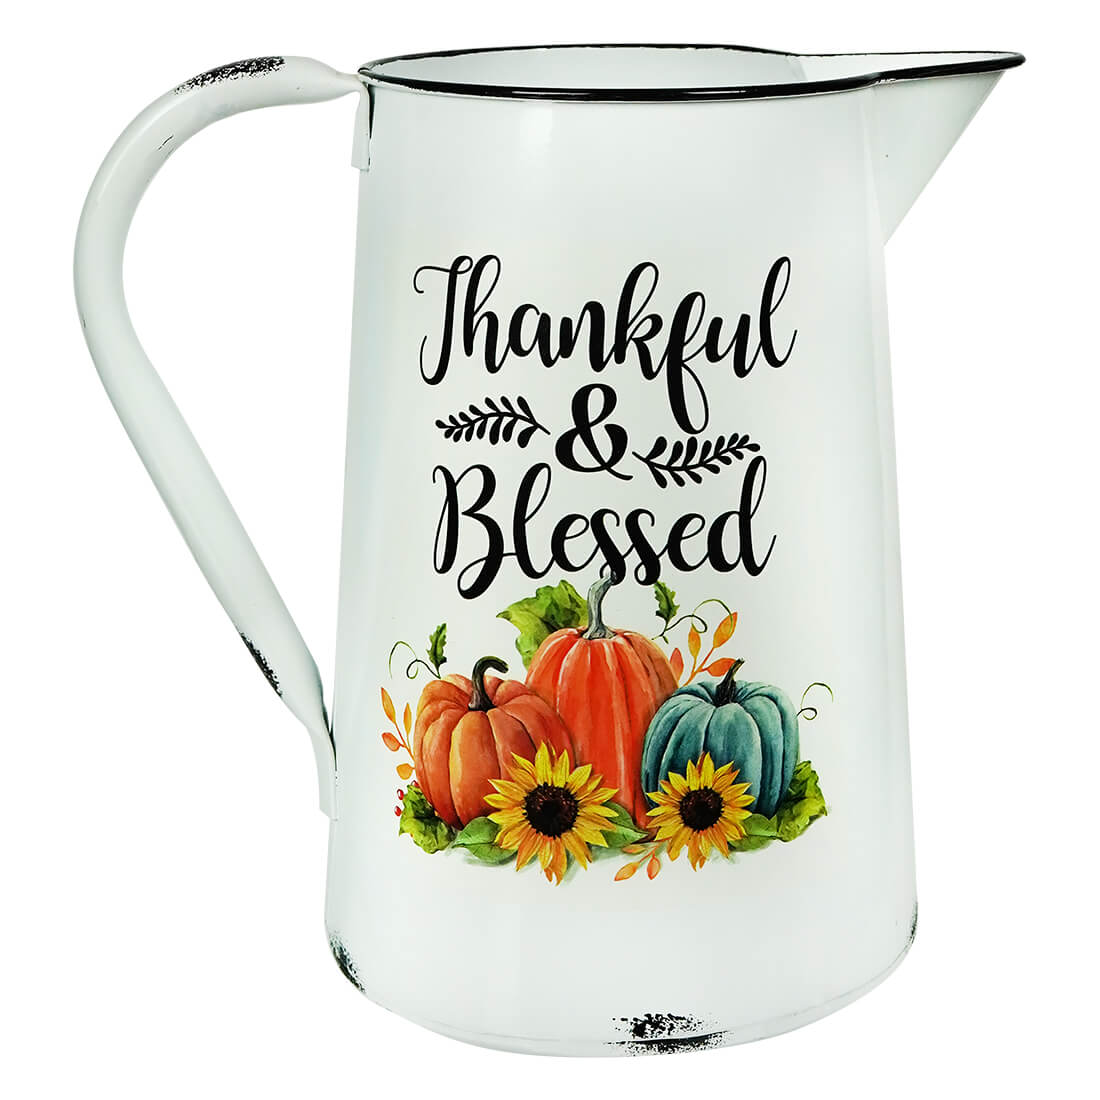 Metal Thankful & Blessed Harvest Pitcher